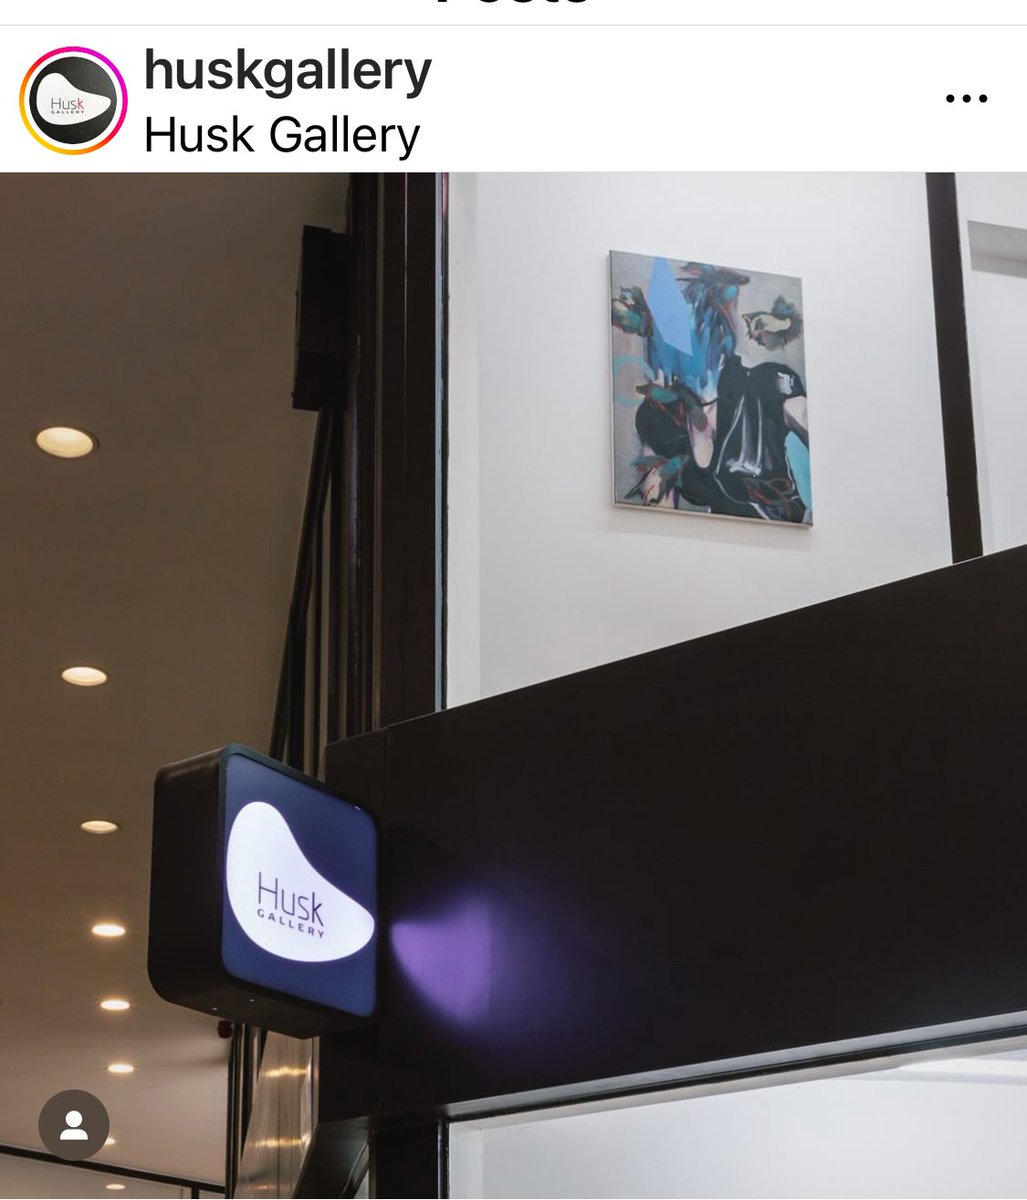 Next Sunday 14  April from 2 to 6 pm on the occasion of the Rivoli Open Sunday. 
Husk gallery Rivoli #12 building, Chaussée de Waterloo 690, 1180 Brussels
 #contemporarypainting #opensunday #artgallery